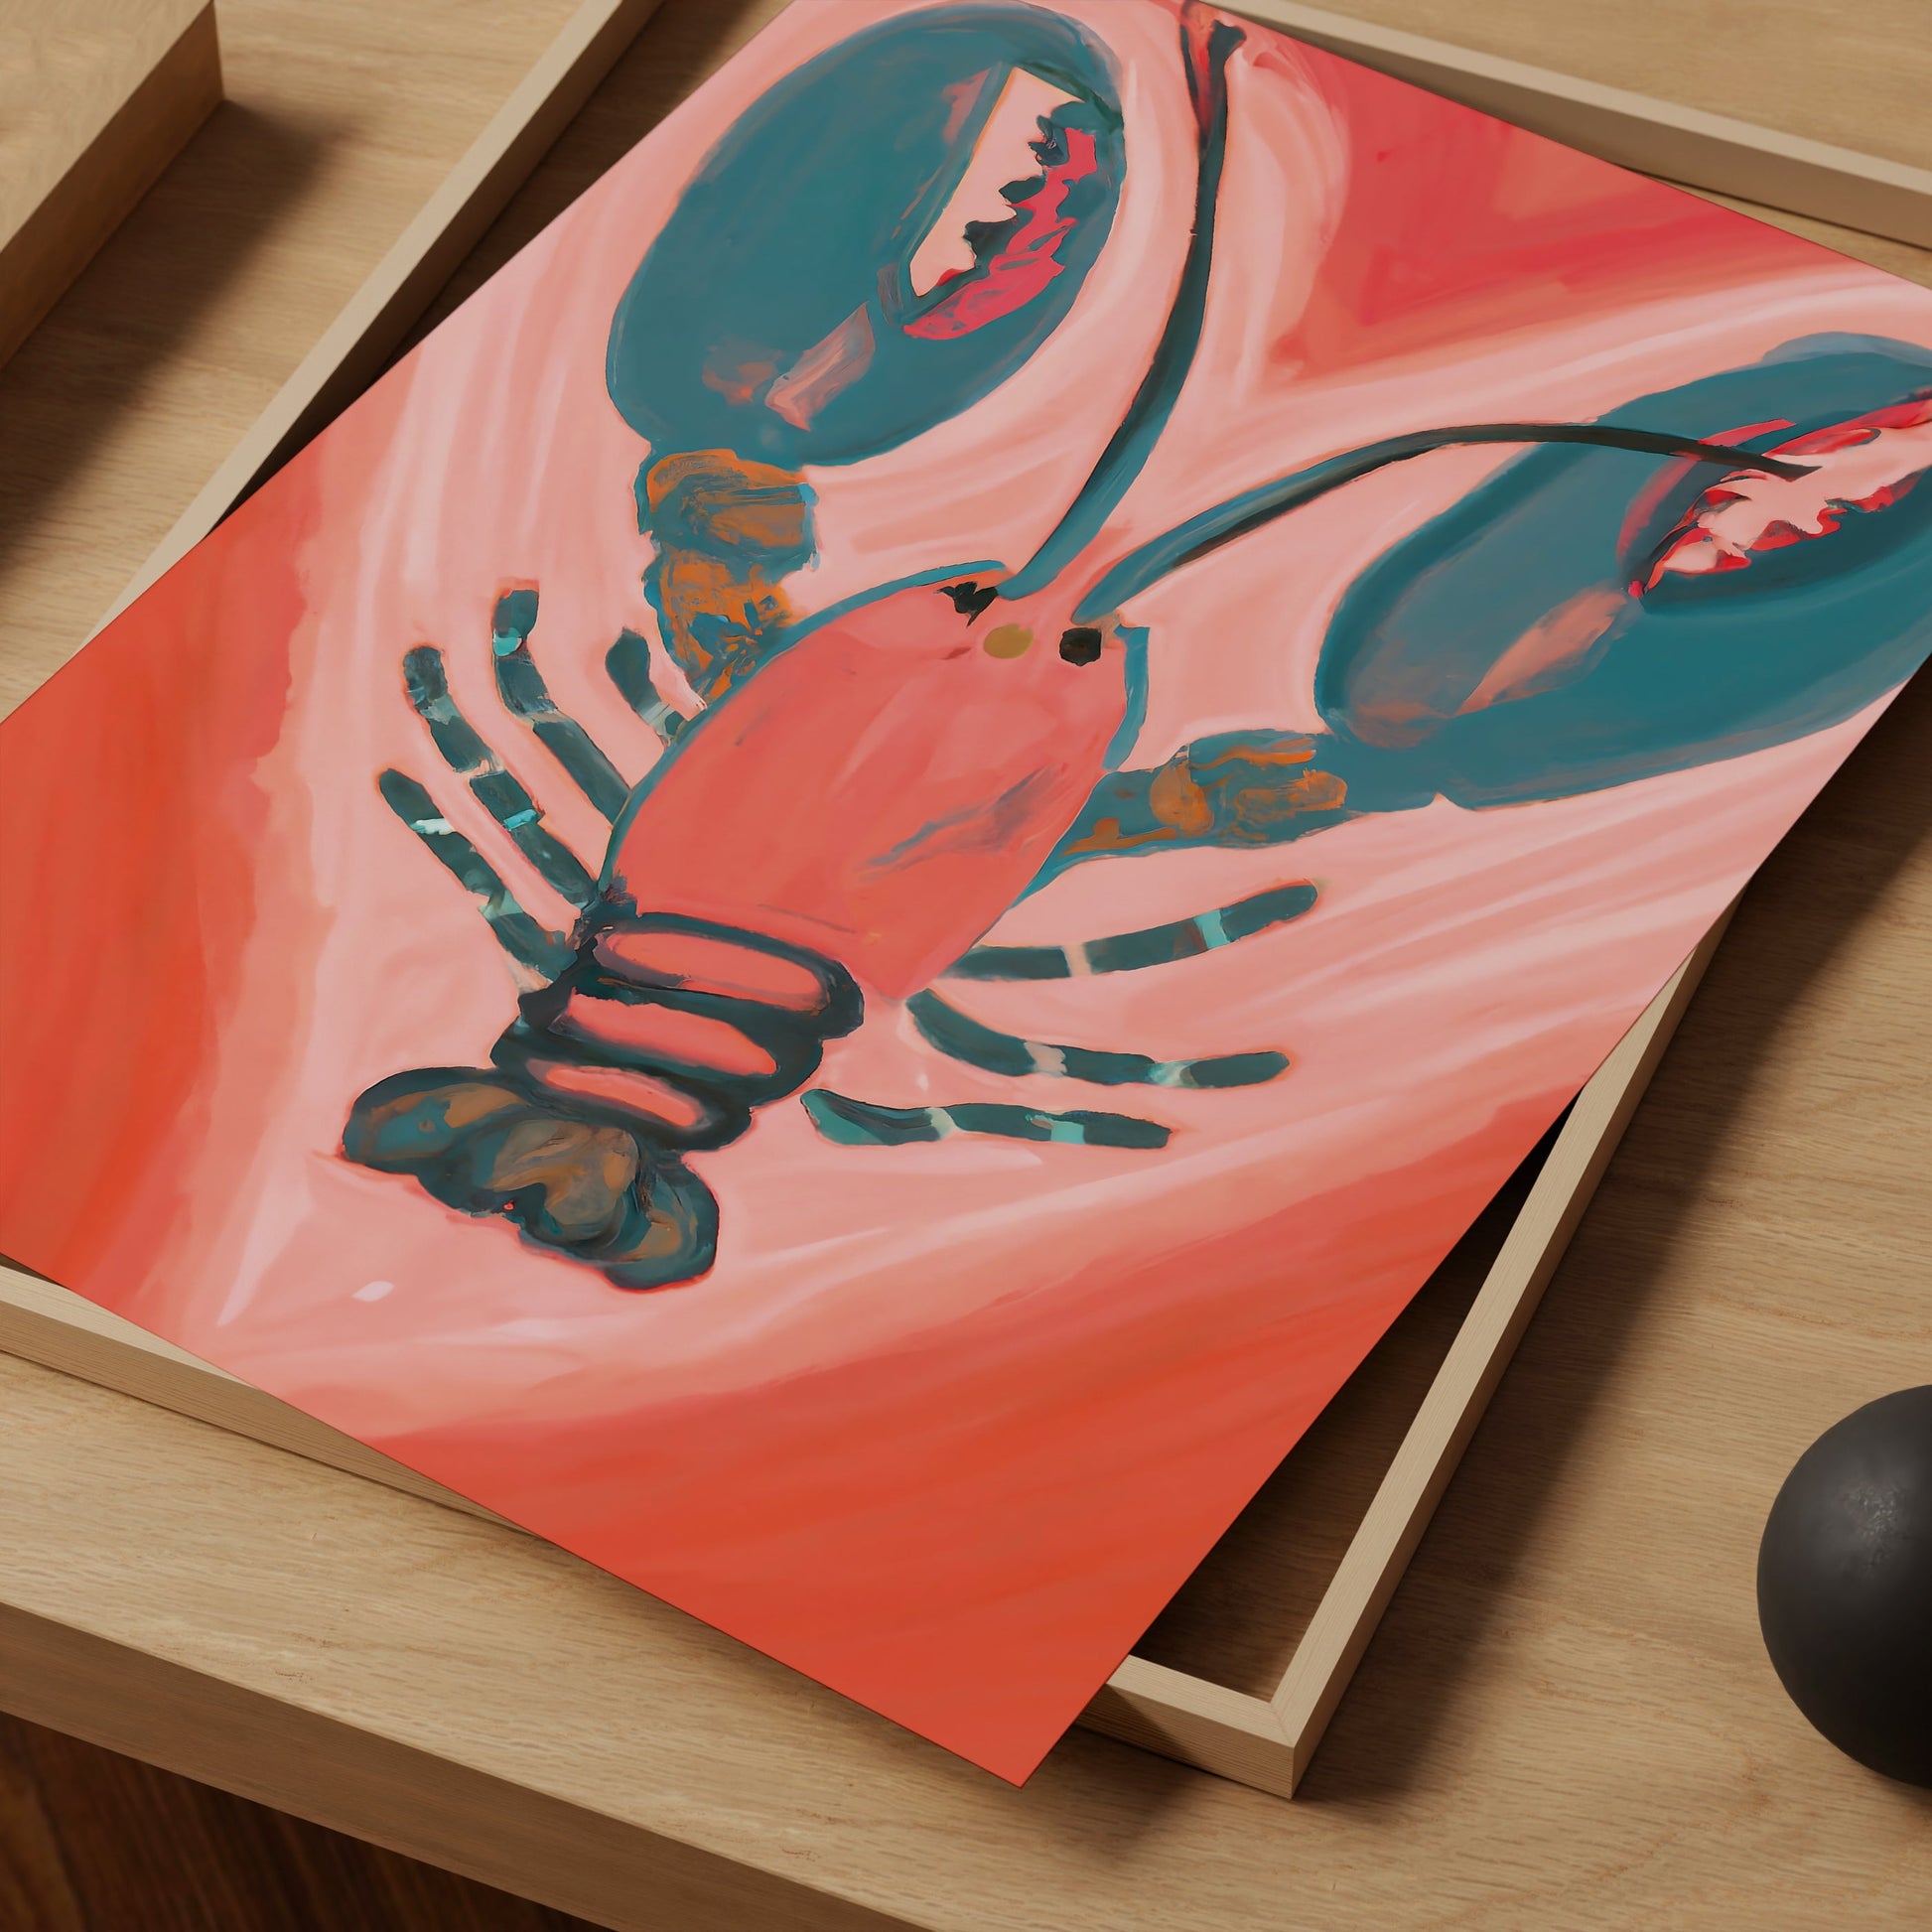 a painting of a lobster in a box